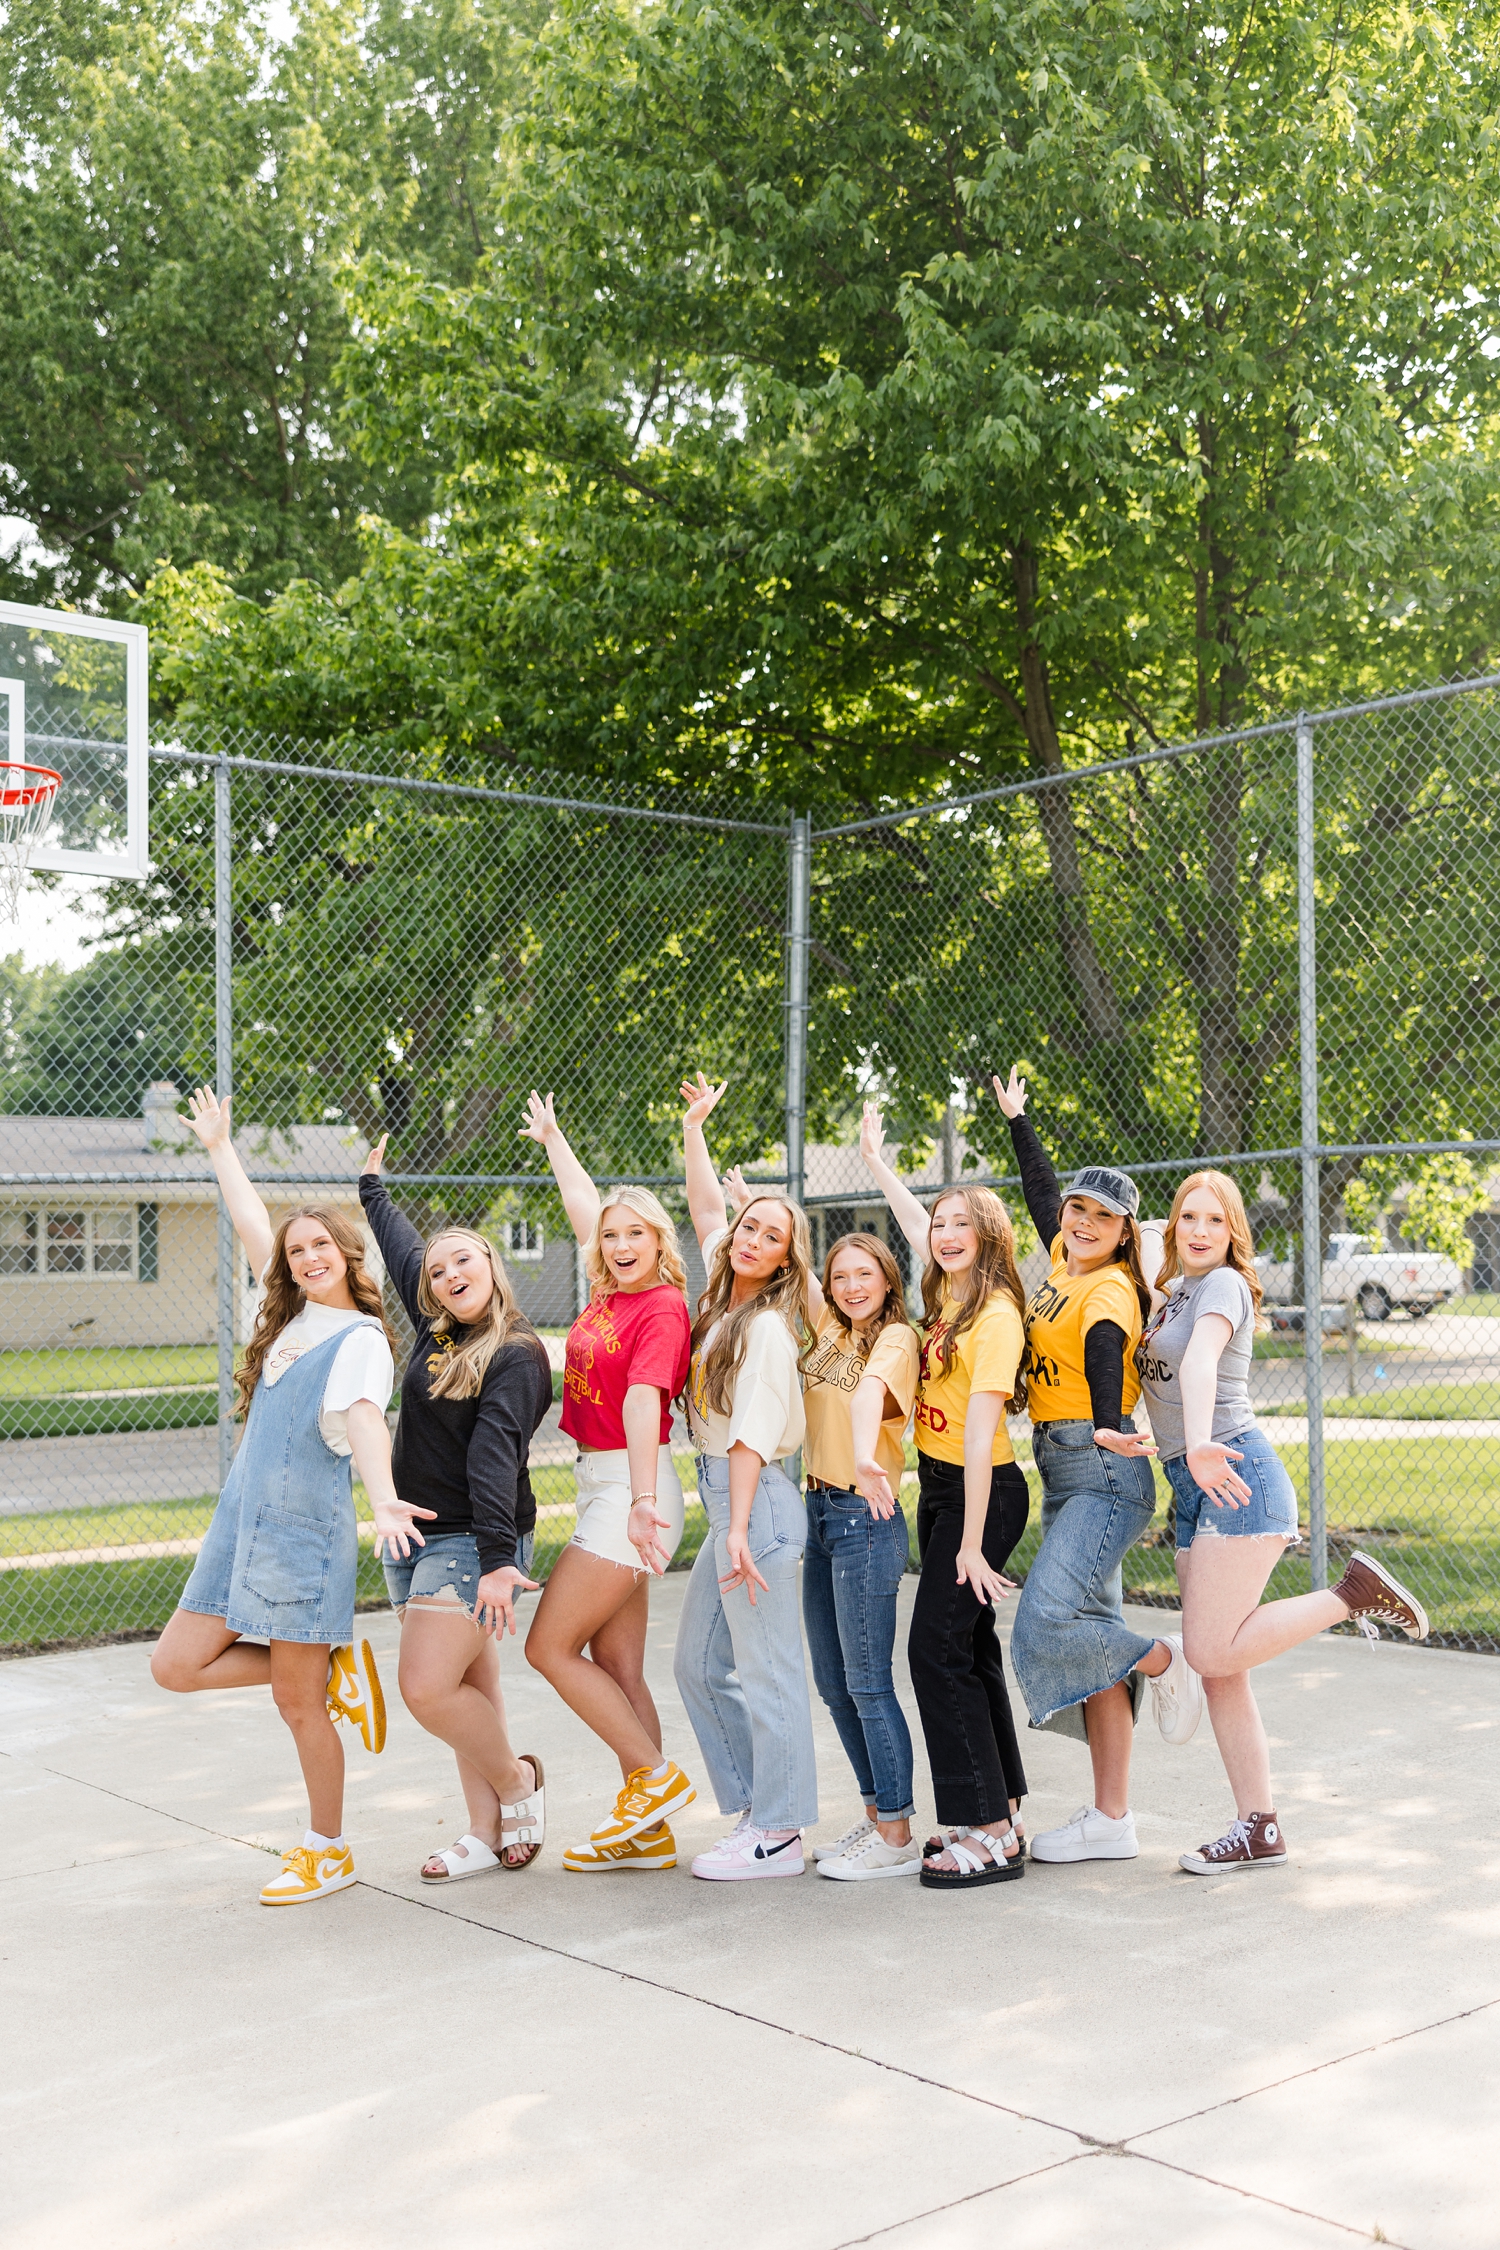 TEAM 25, all wearing Iowa or Iowa State clothing, cheer with their hands in the air in an outdoor basketball court | CB Studio